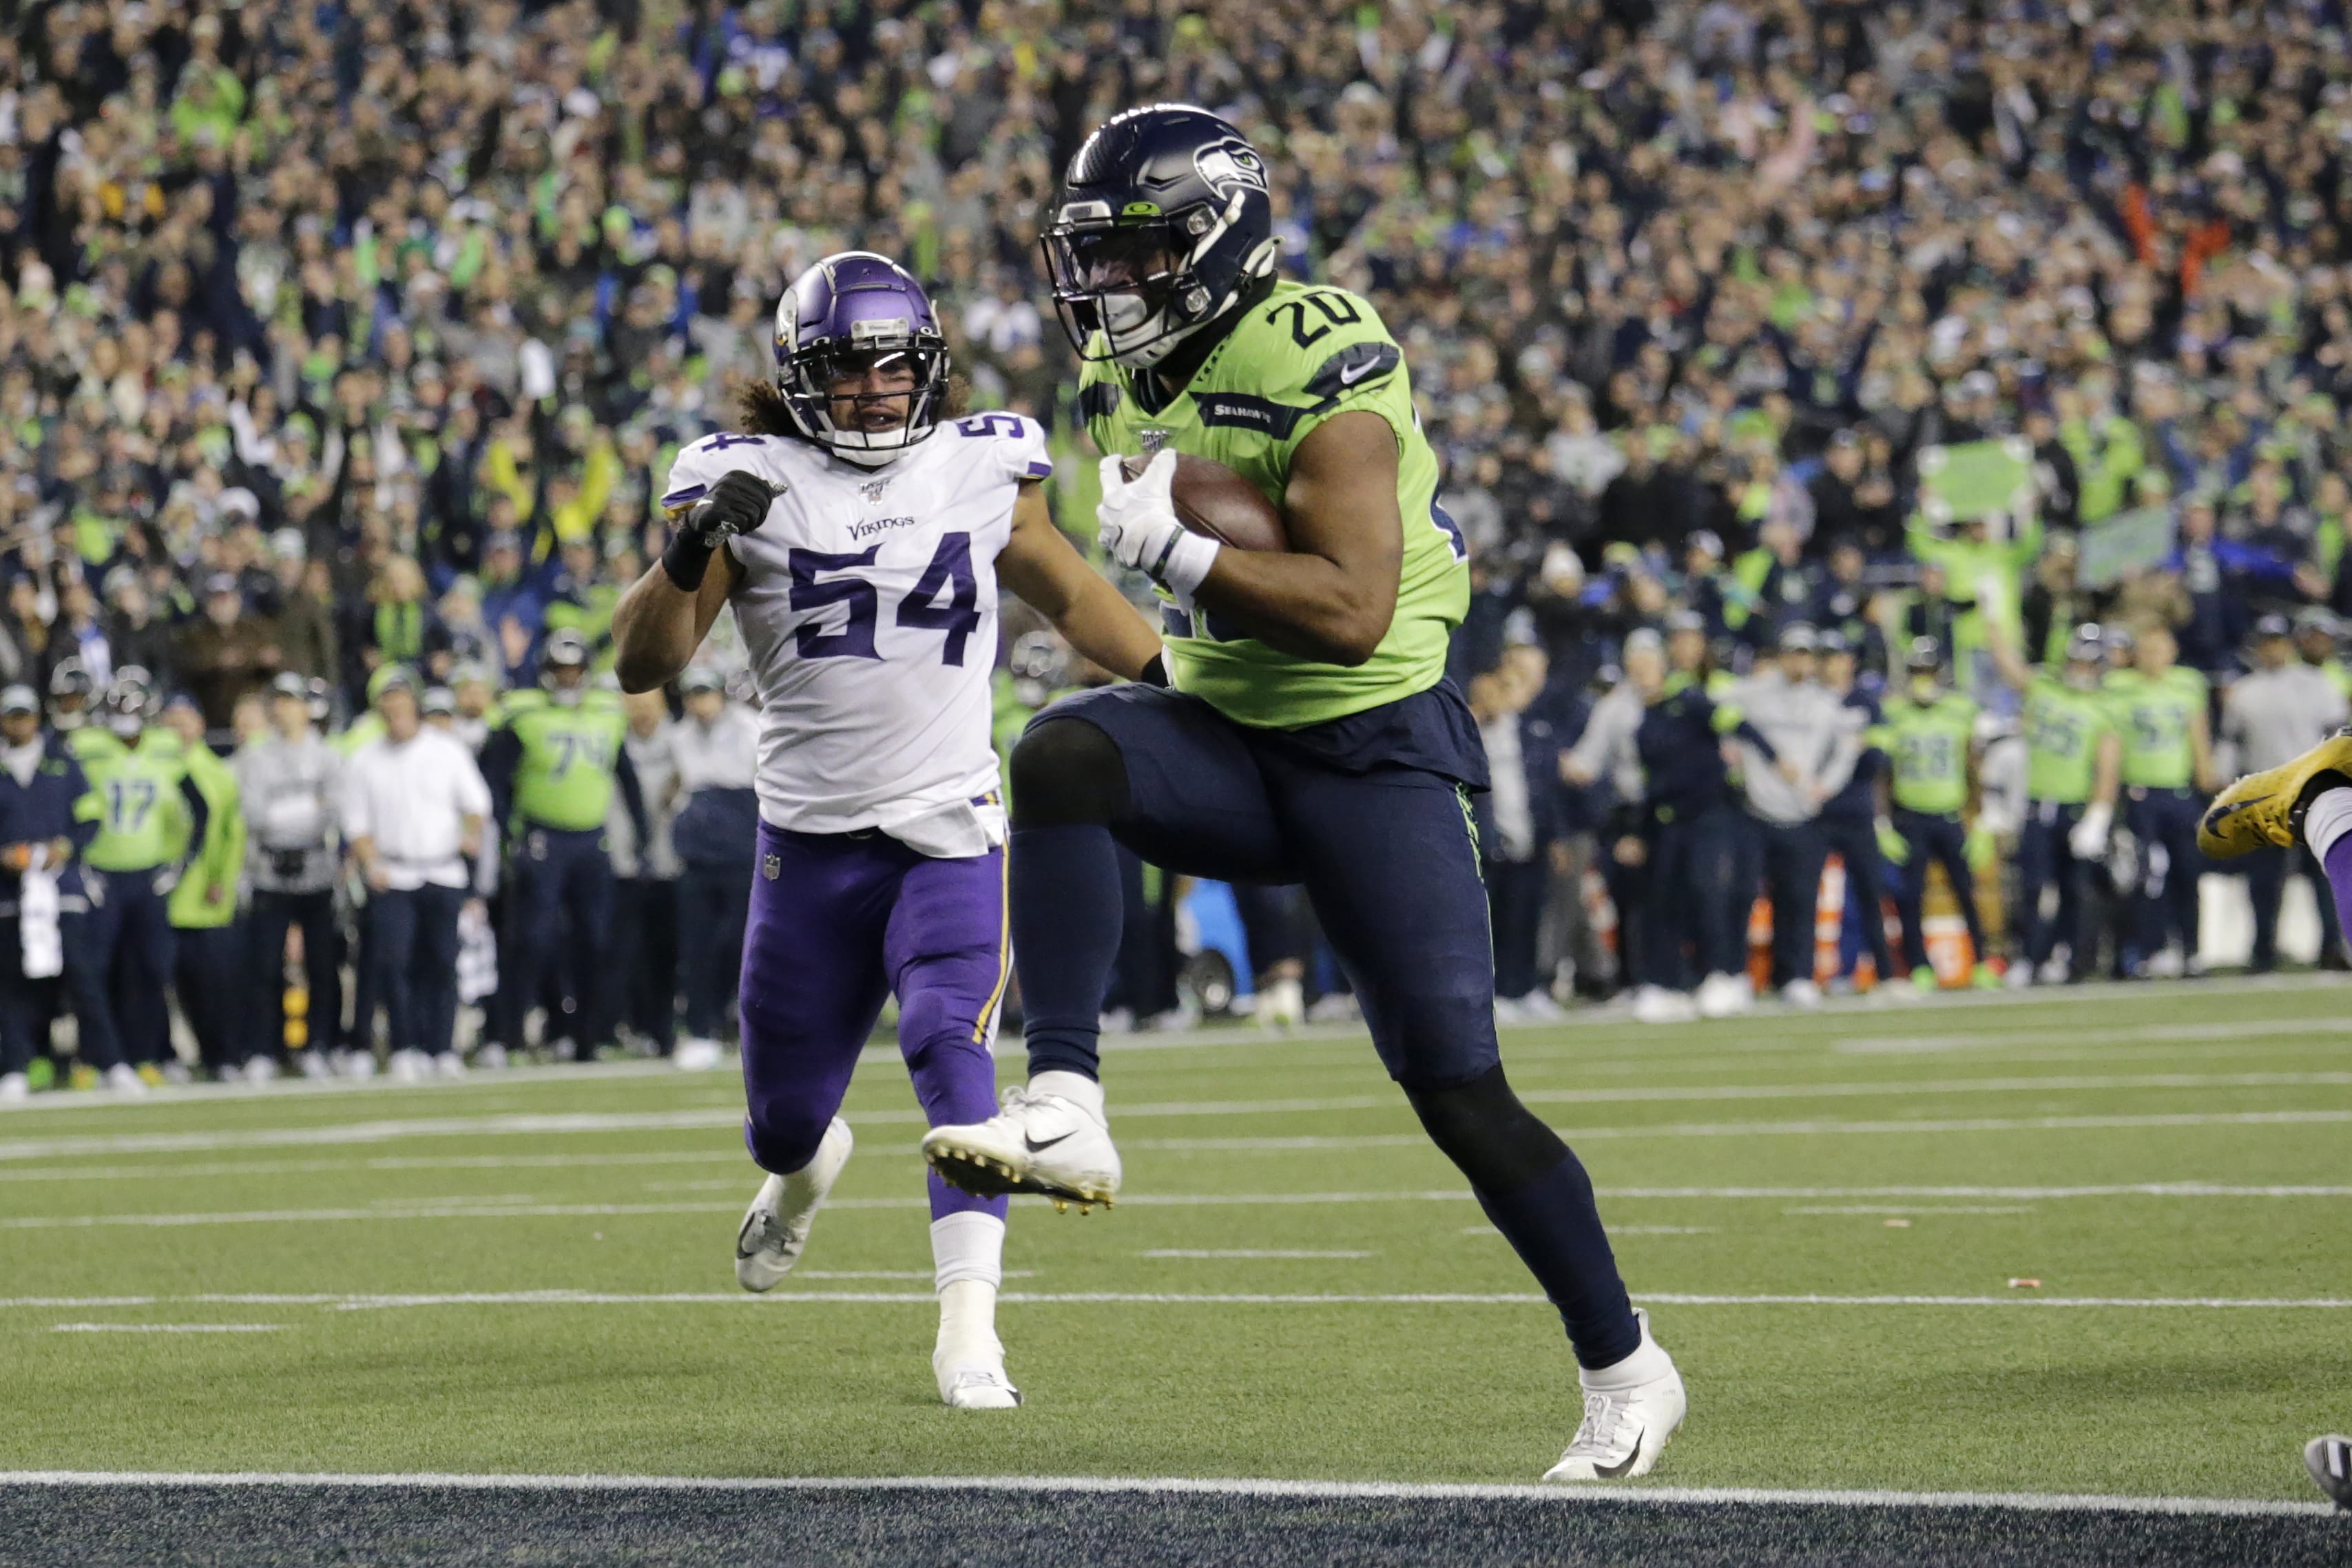 Seattle Seahawks' Rashaad Penny high steps into the end zone for a touchdown against the Minnesota Vikings during the second half of an NFL football game, Monday, Dec. 2, 2019, in Seattle.